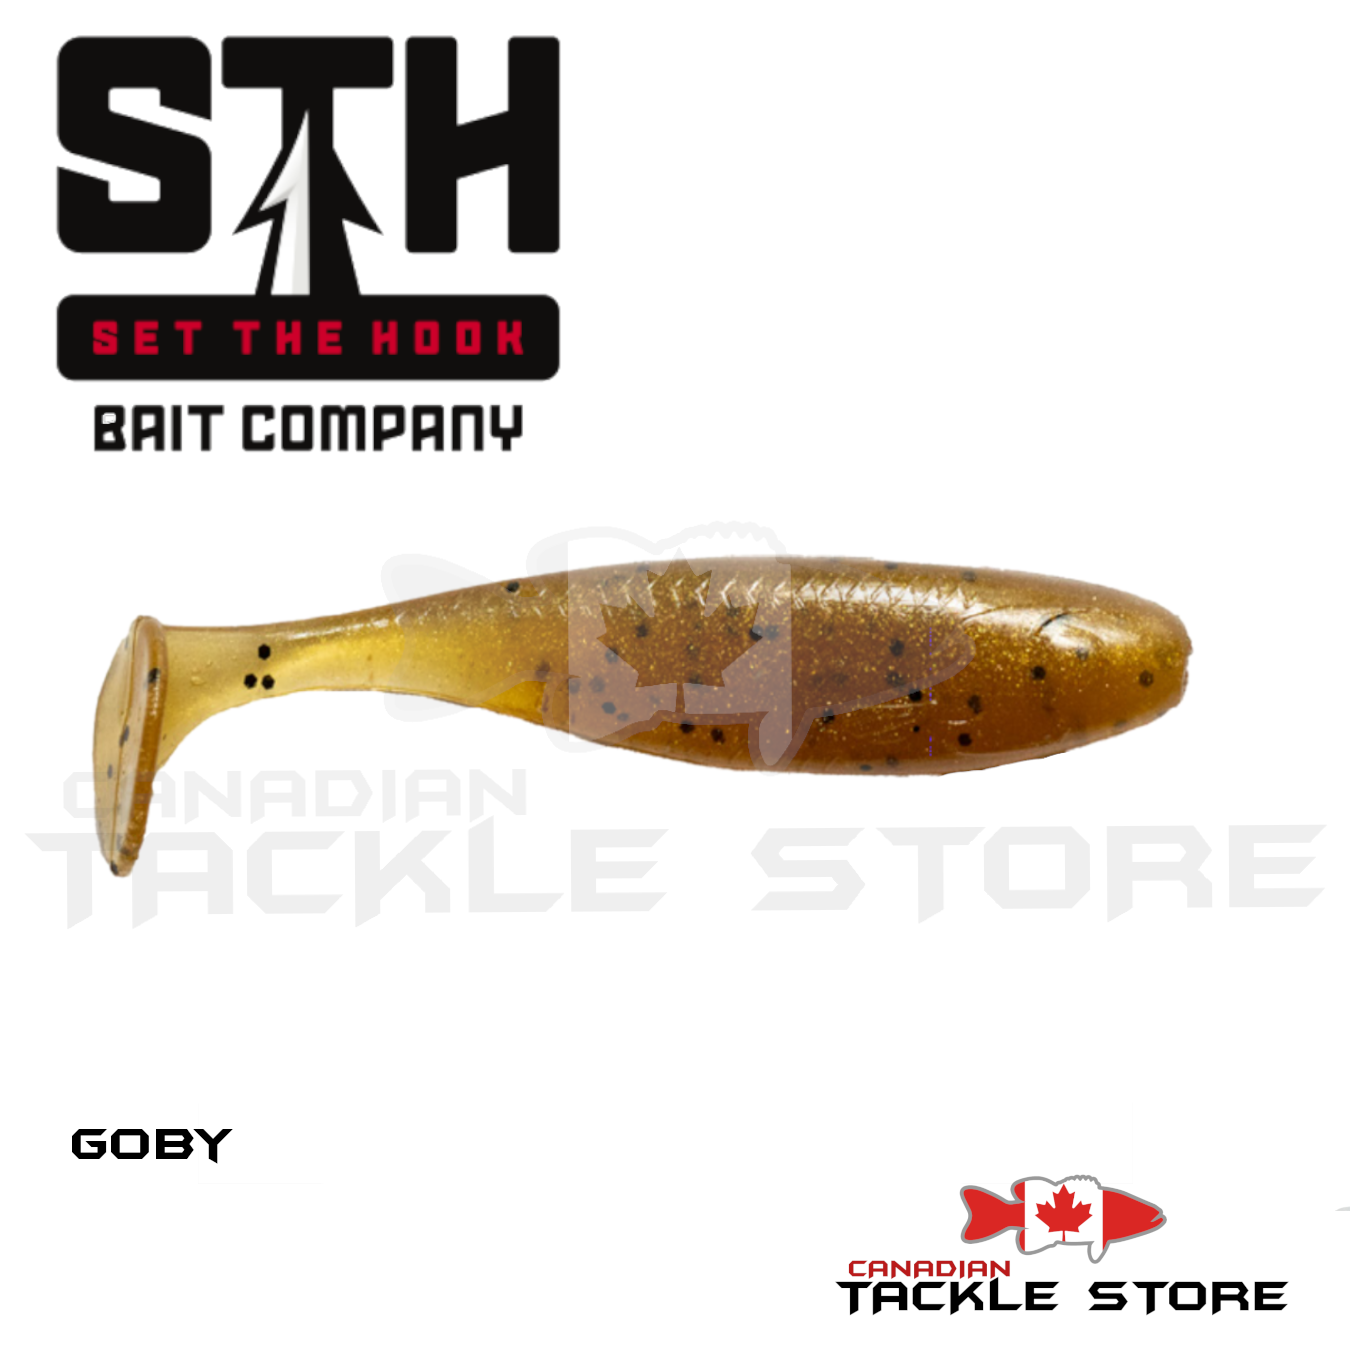 Terminal Tackle – Canadian Tackle Store